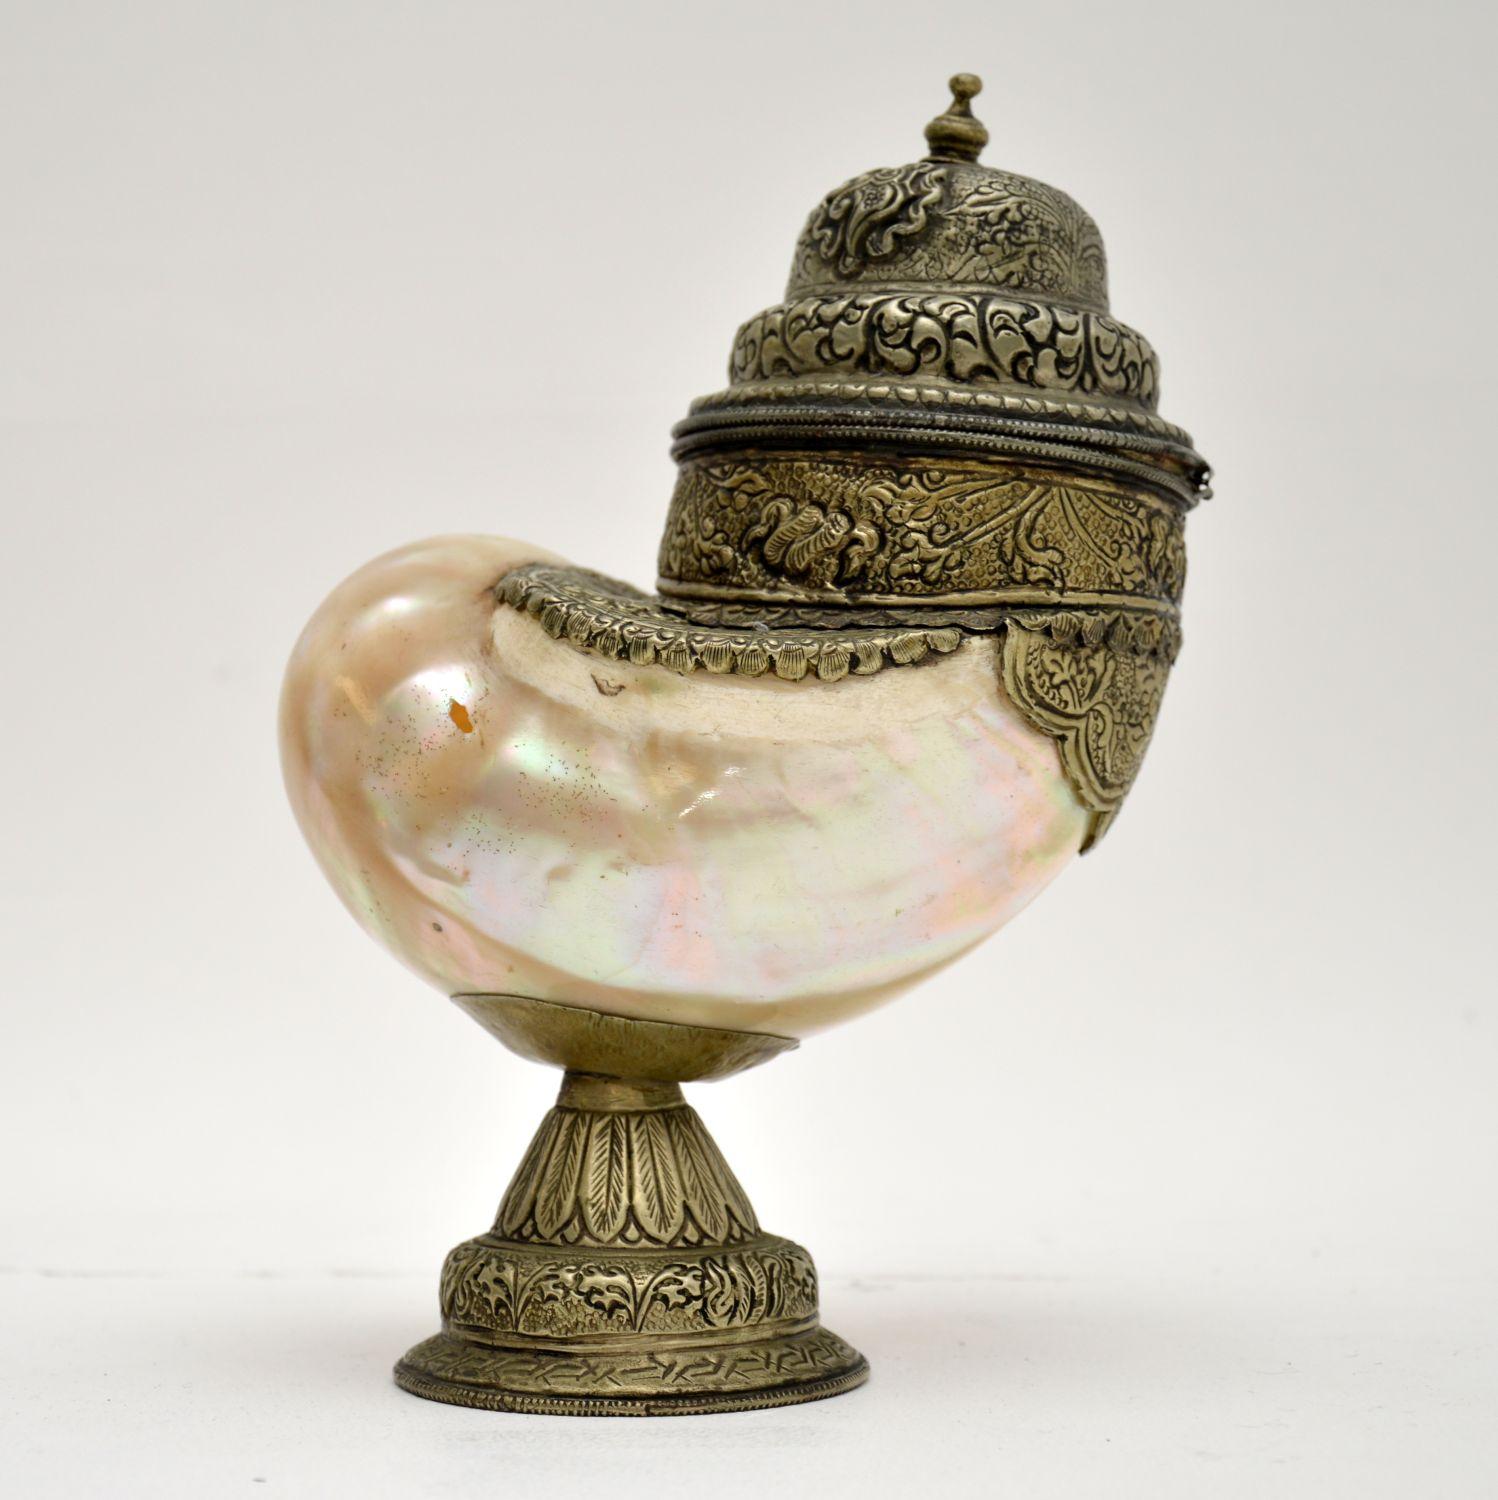 A rare and beautiful ornament, this is an antique Nautilus shell cup with lid, mounted with silver. It was likely made in India, and dates from the late 19th century.
It is beautifully made with fine details, the shell has stunning iridescent